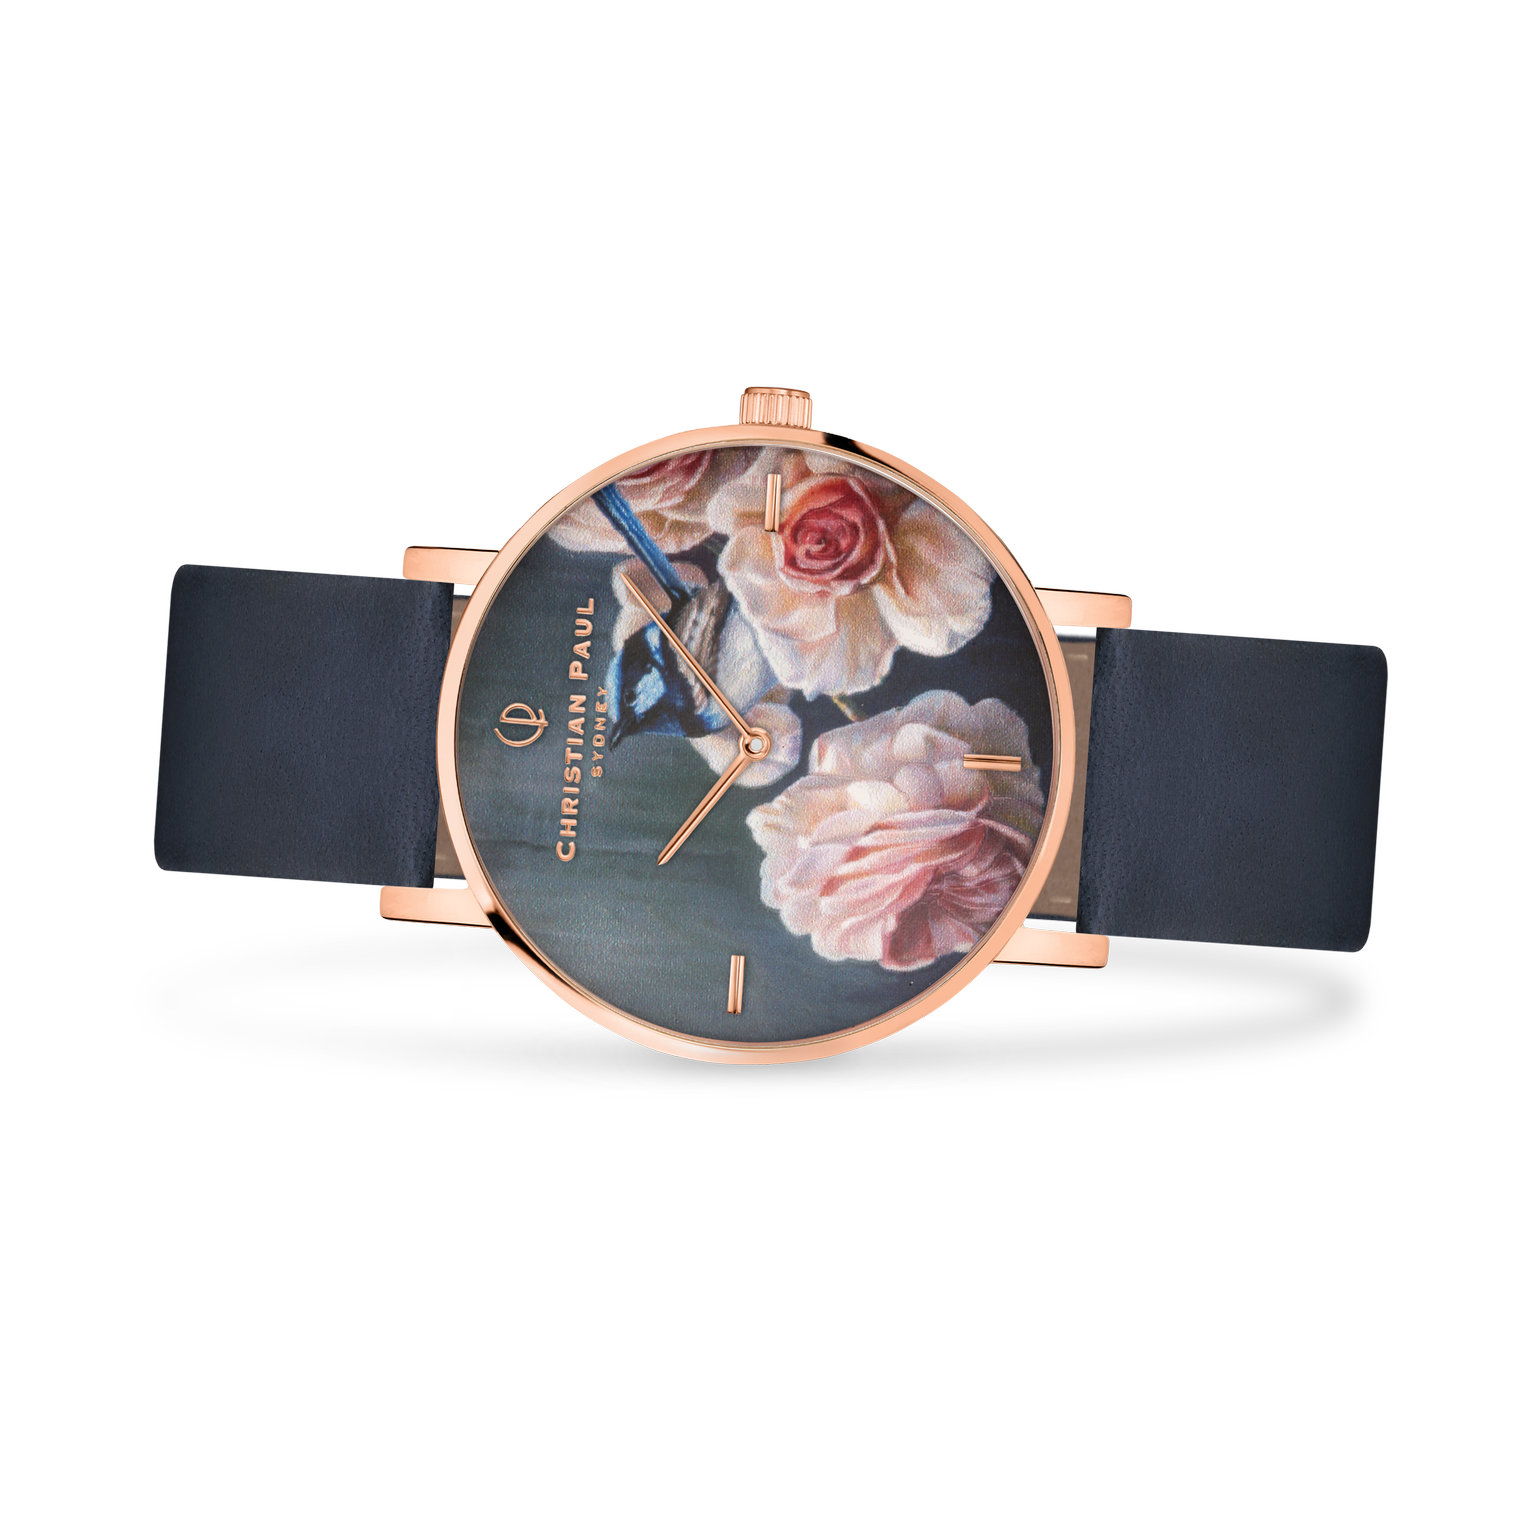 Luxury floral navy and rose gold watch